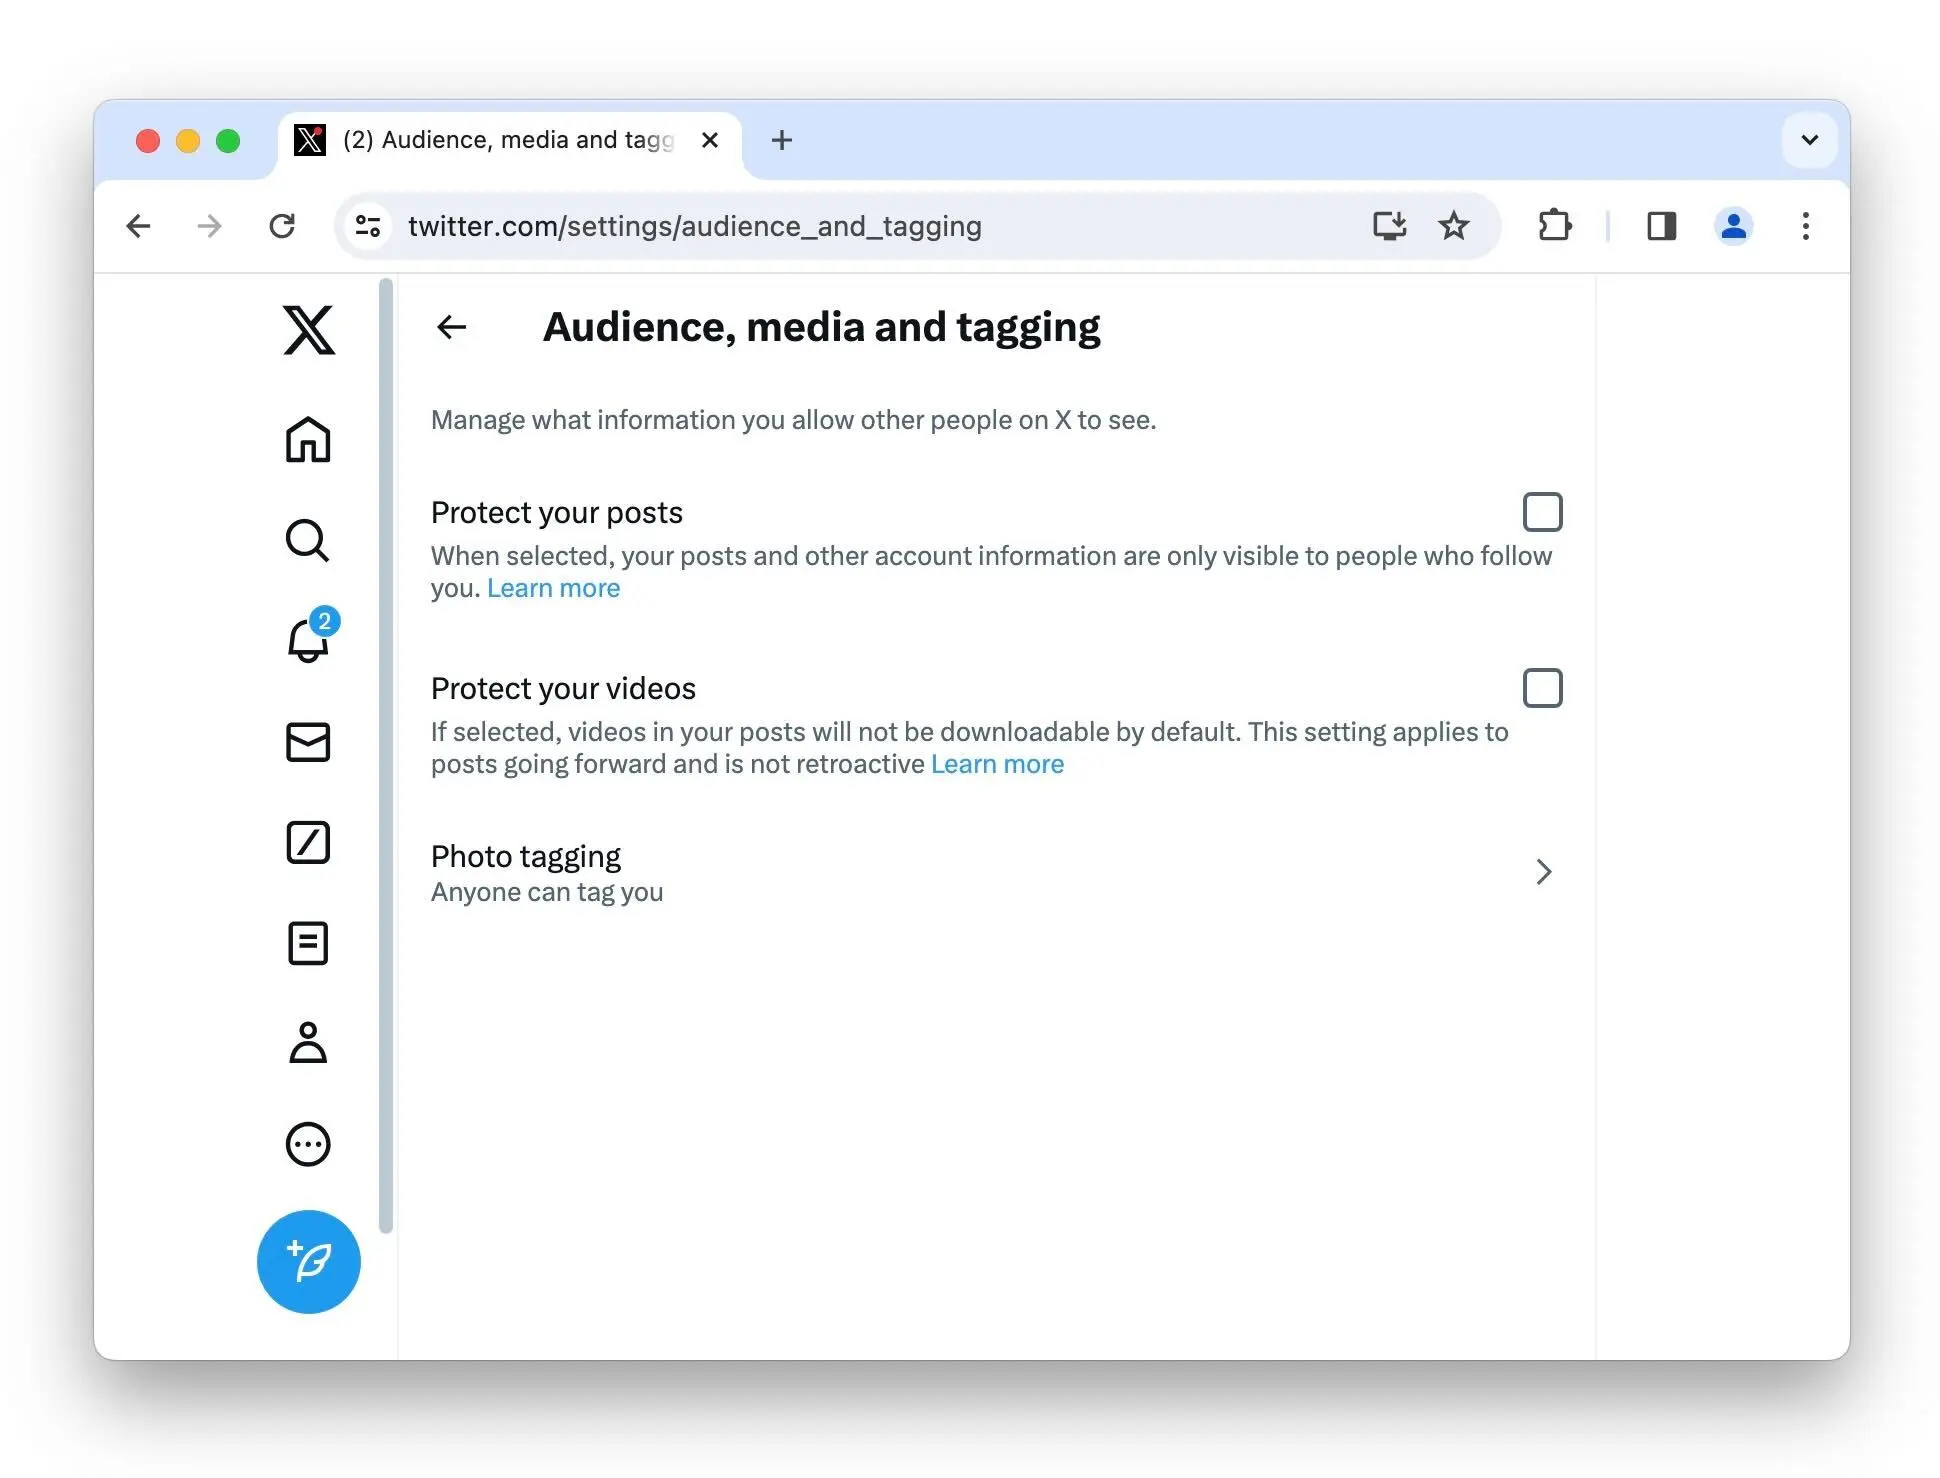 Twitter's audience, media and tagging settings